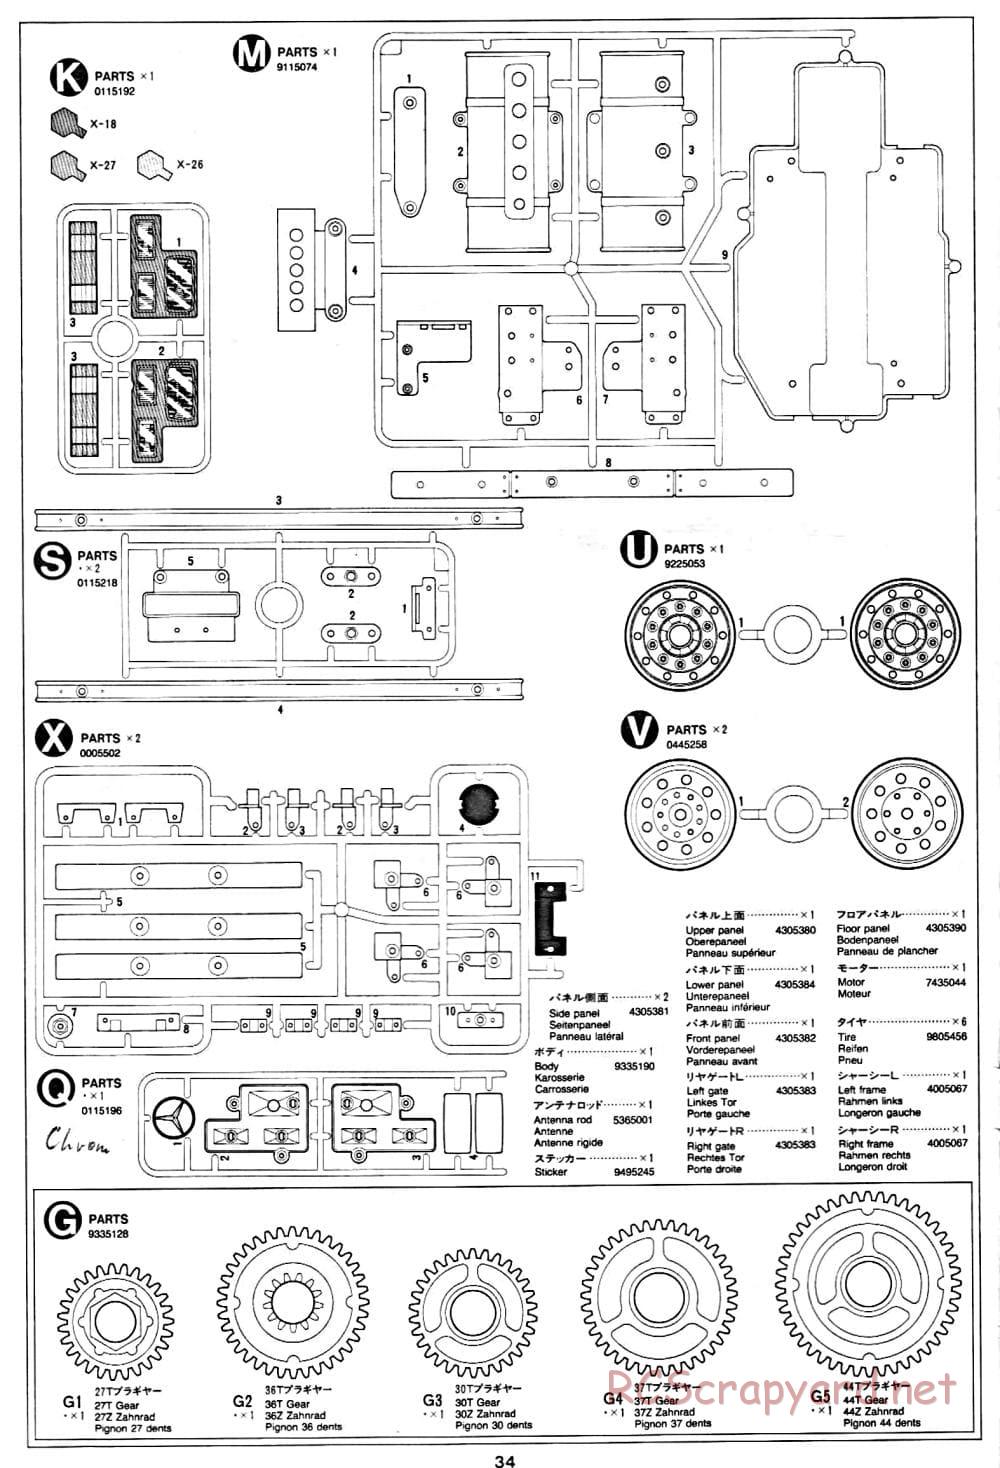 Tamiya - Mercedes-Benz 1850L Delivery Truck - Manual - Page 34